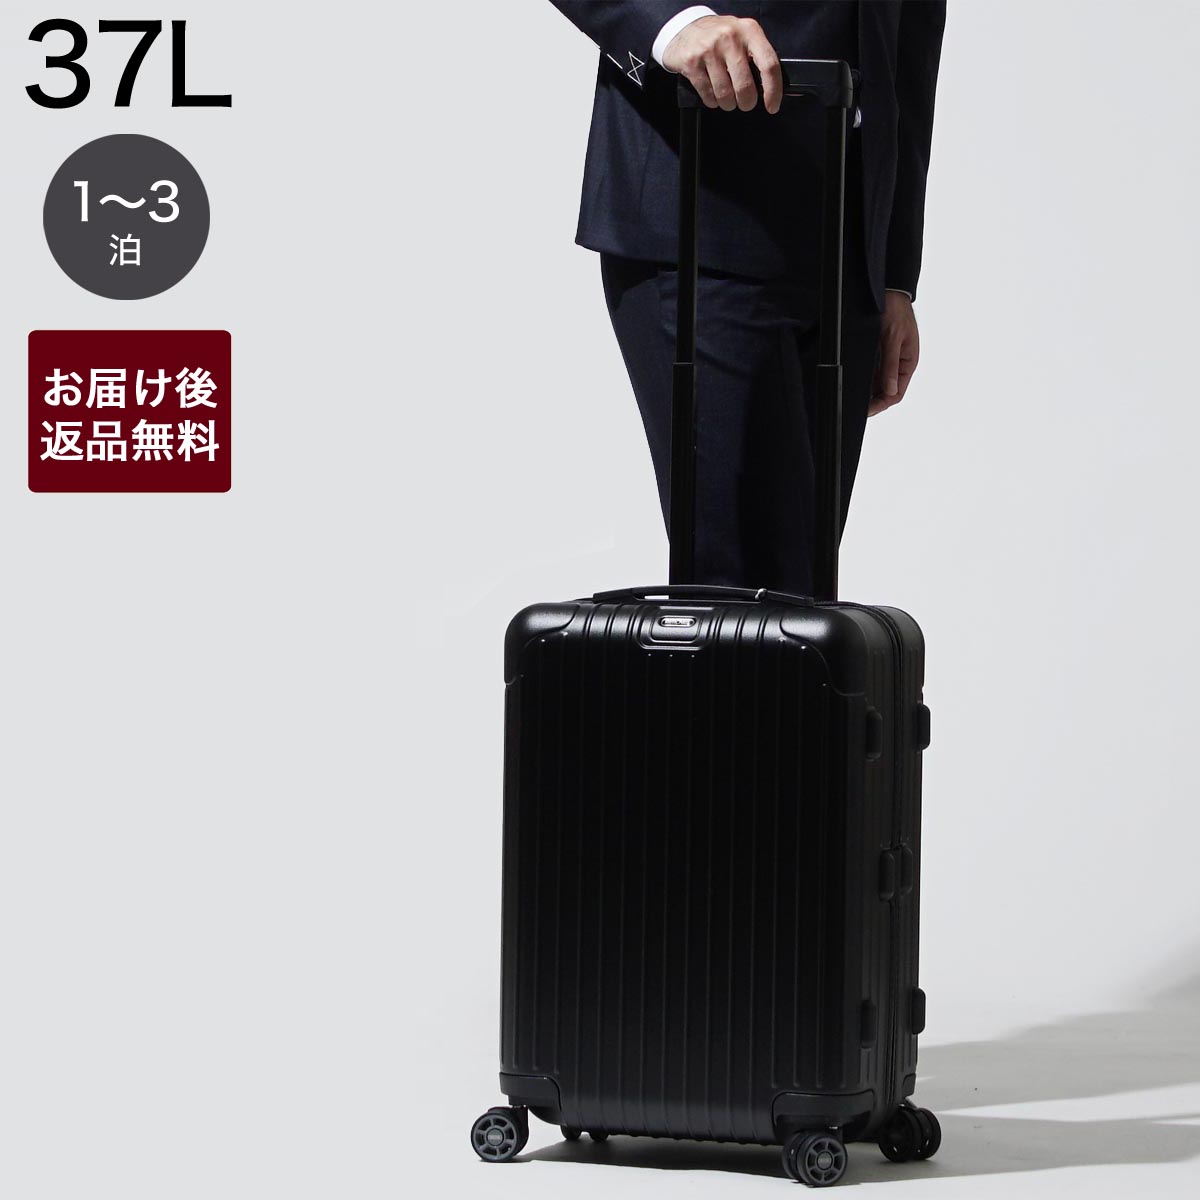 rimowa suitcase carry on